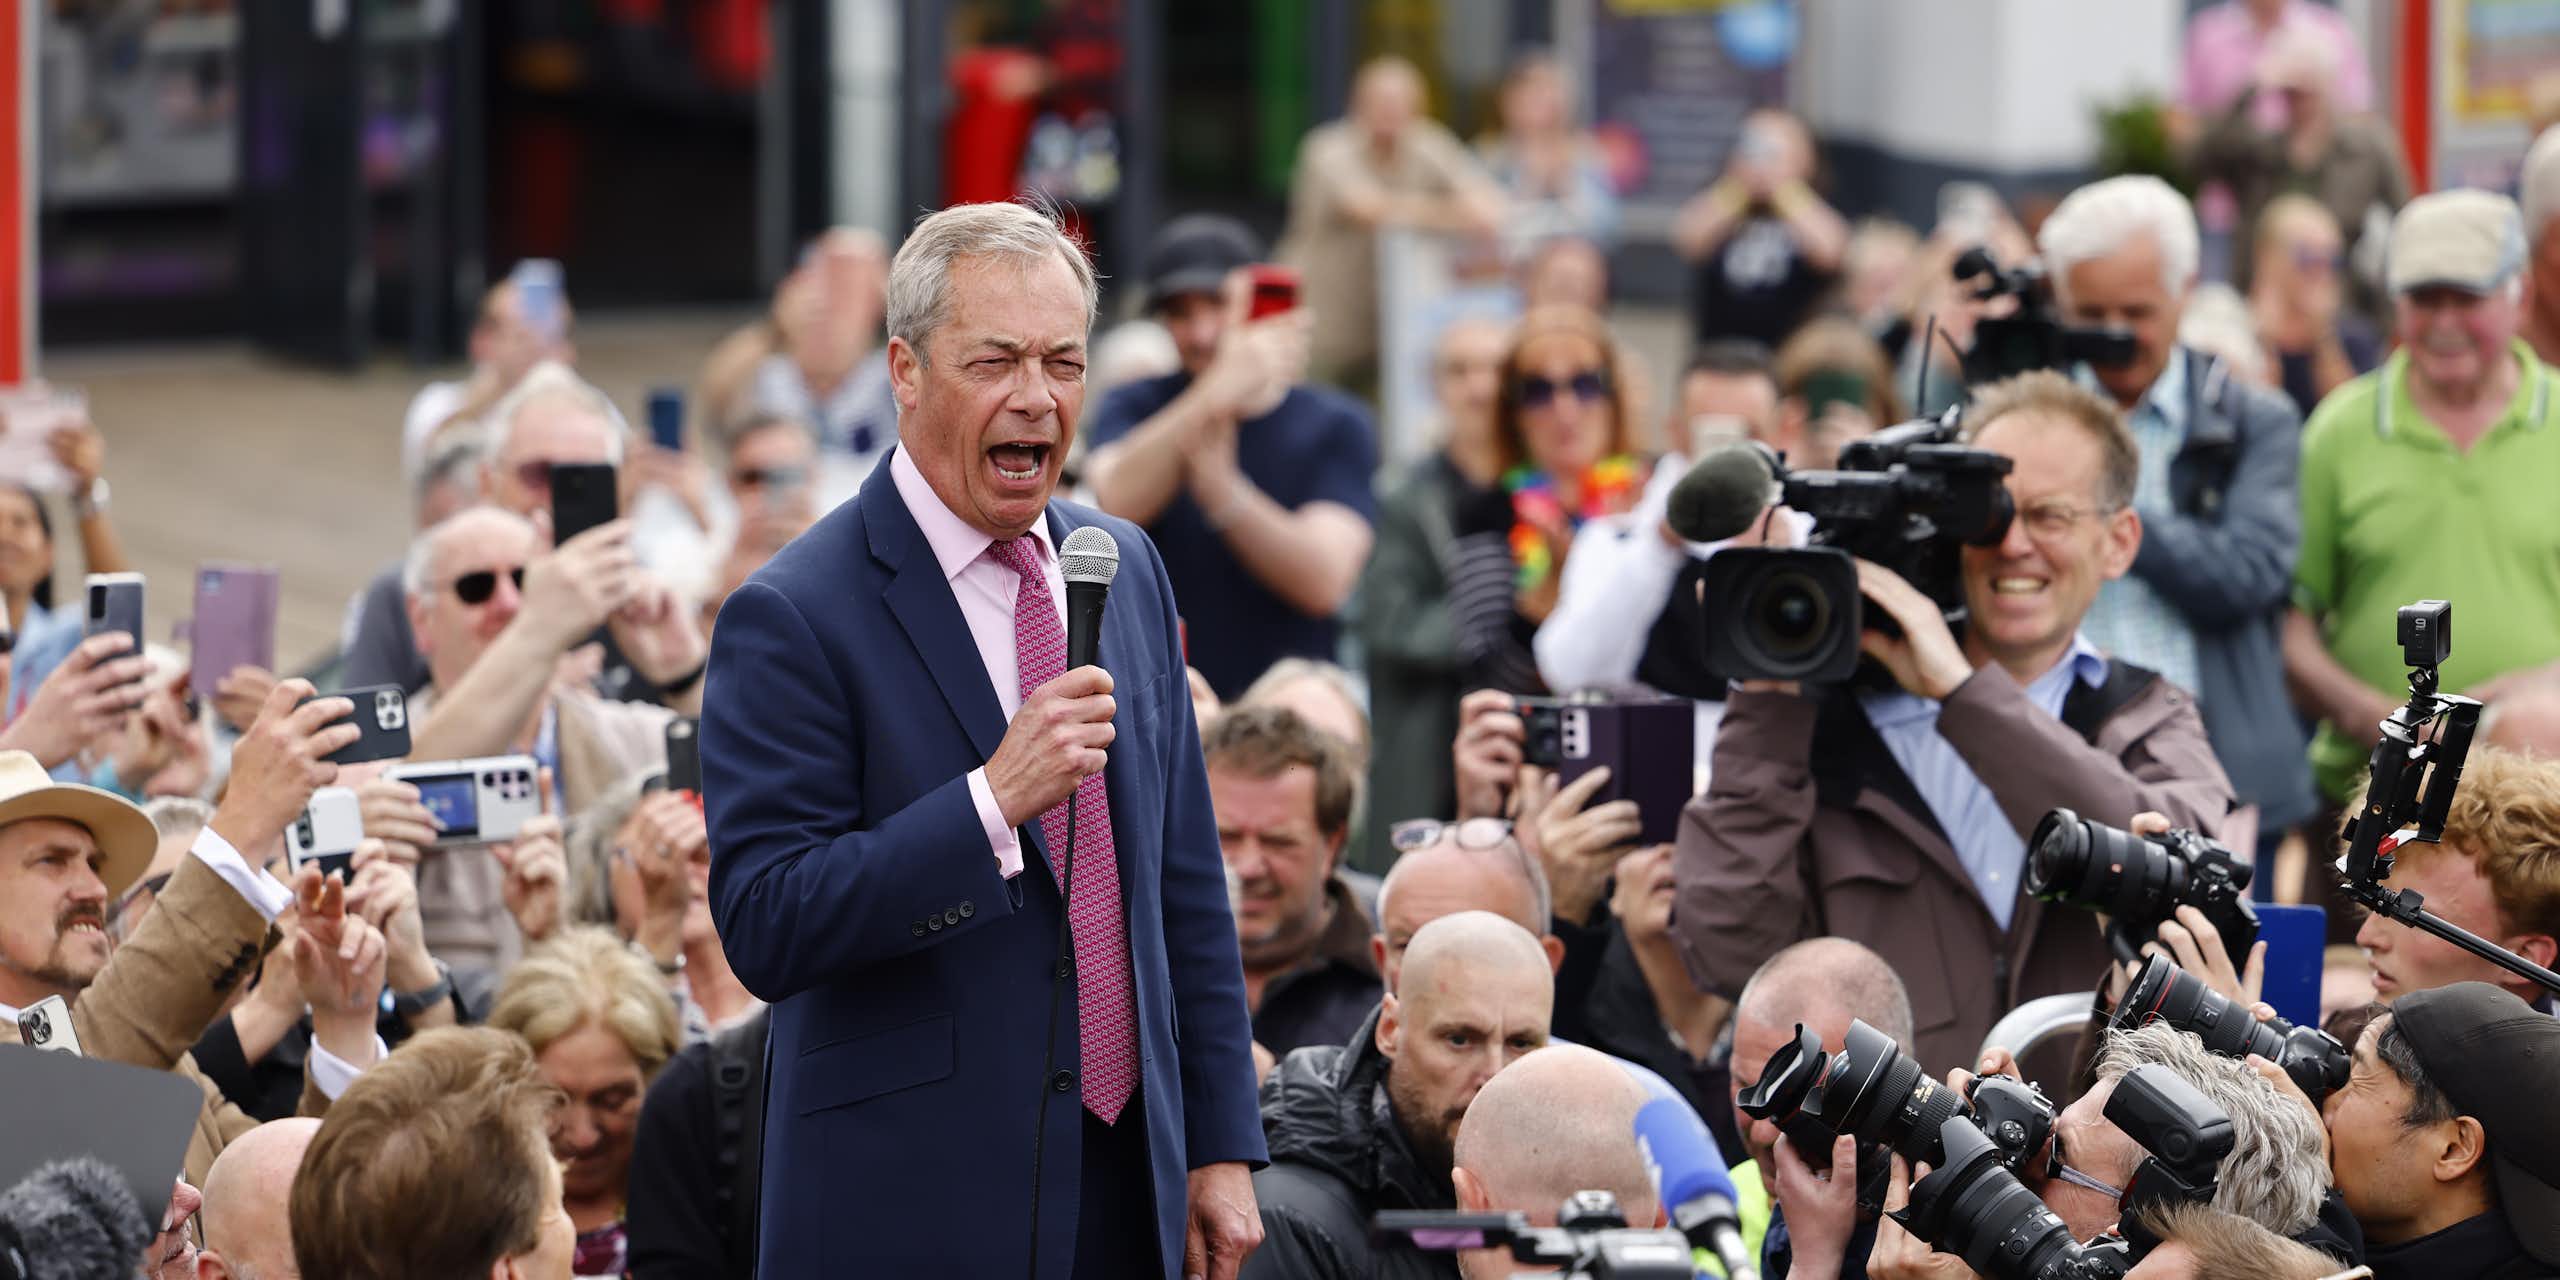 Nigel Farage speaks into a microphone surrounded by a crowd and photographers